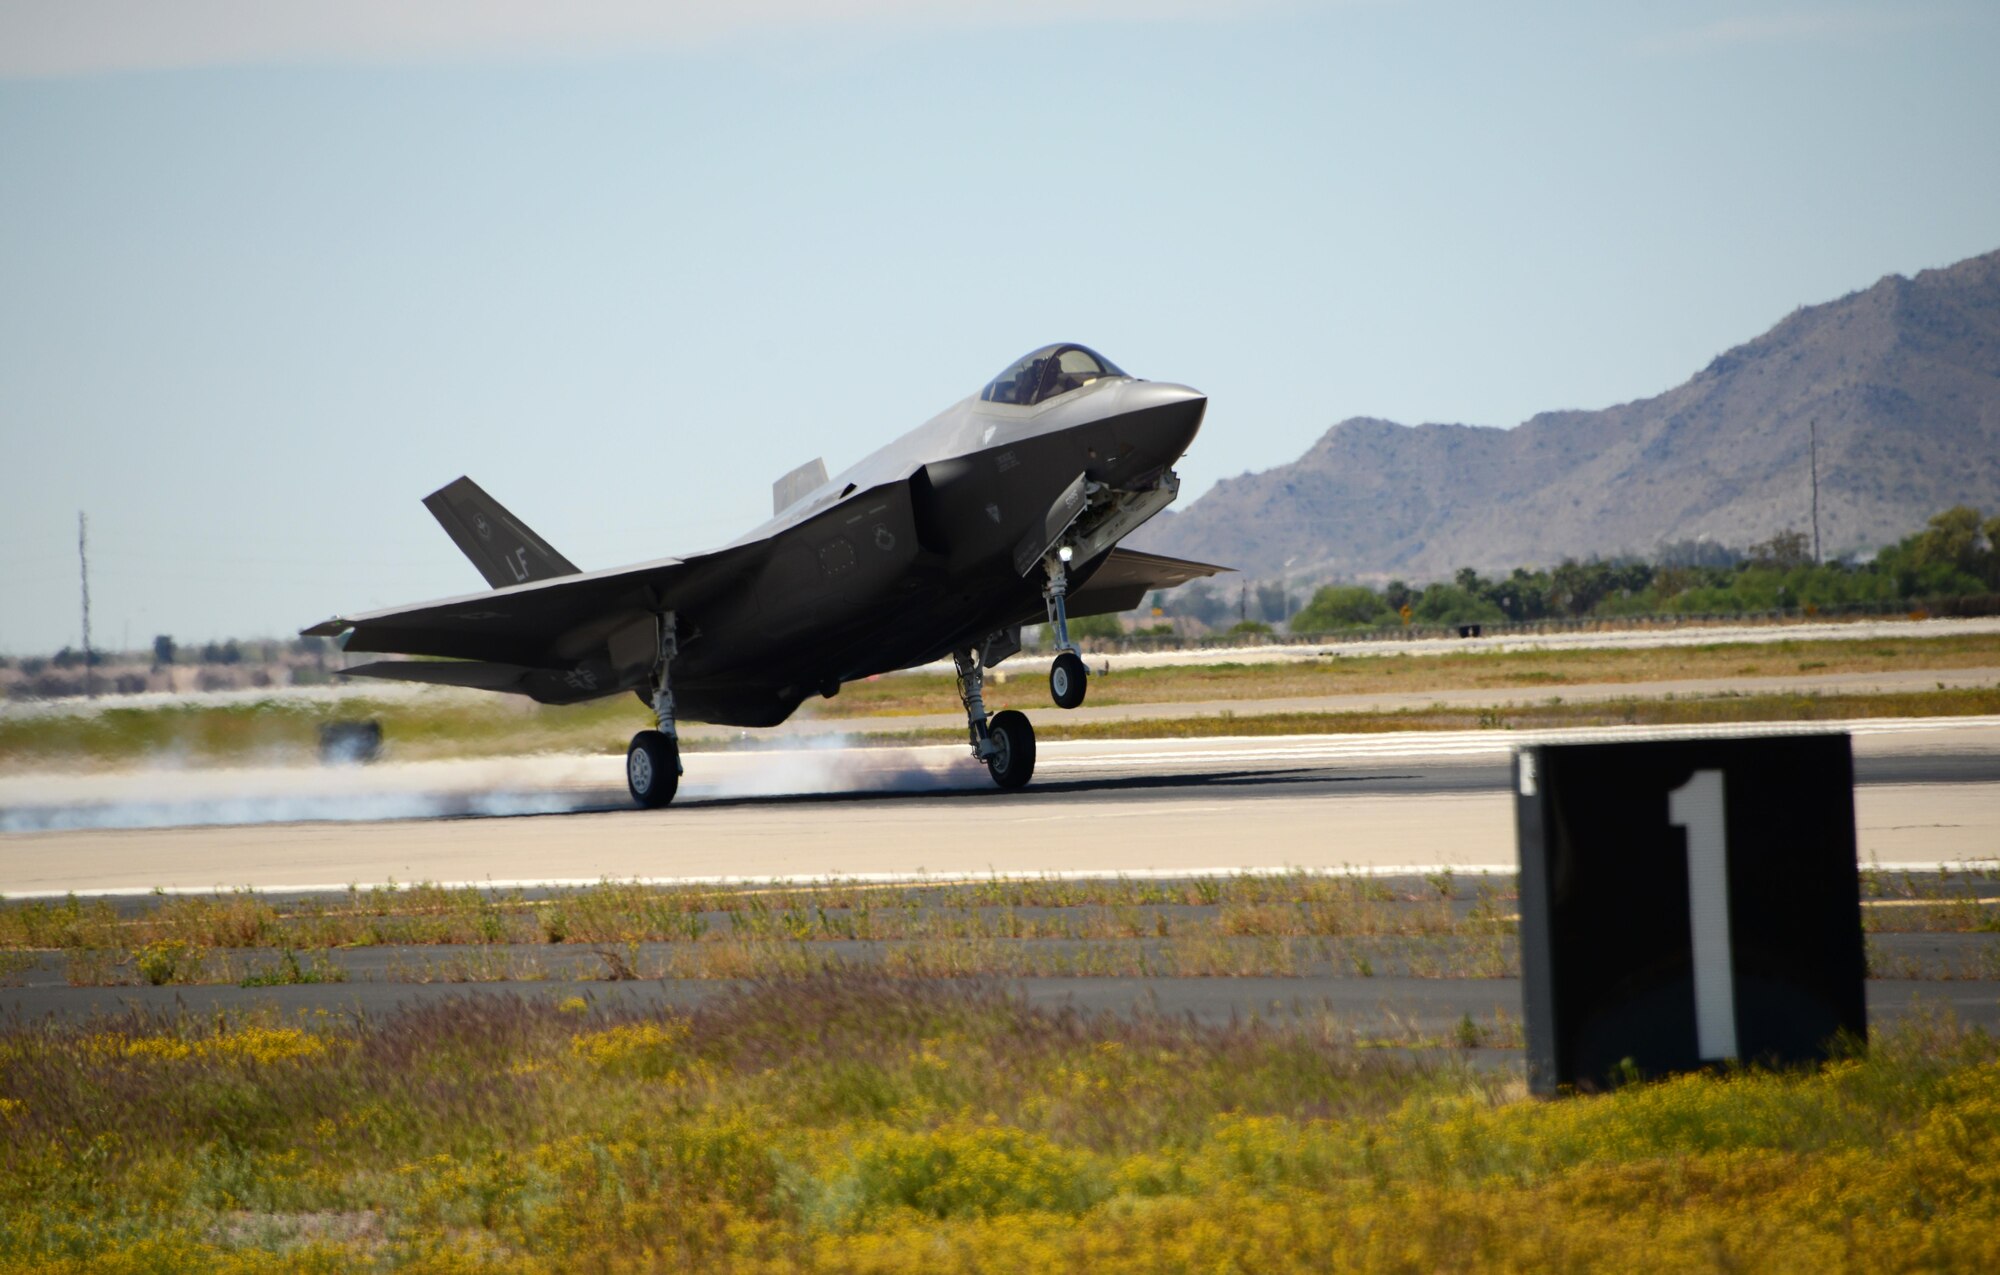 Lt. Col. Robert Miller, 62nd Fighter Squadron pilot, lands the 10,000th F-35 Lightning II training sortie at Luke Air Force Base, Ariz March 29, 2017. The 5,000th training sortie was flown in May 2015 marking more than 5,000 sorties flown in 10 months as Luke continues to build the future of air power. (U.S. Air Force photo by Airman 1st Class Alexander Cook)  